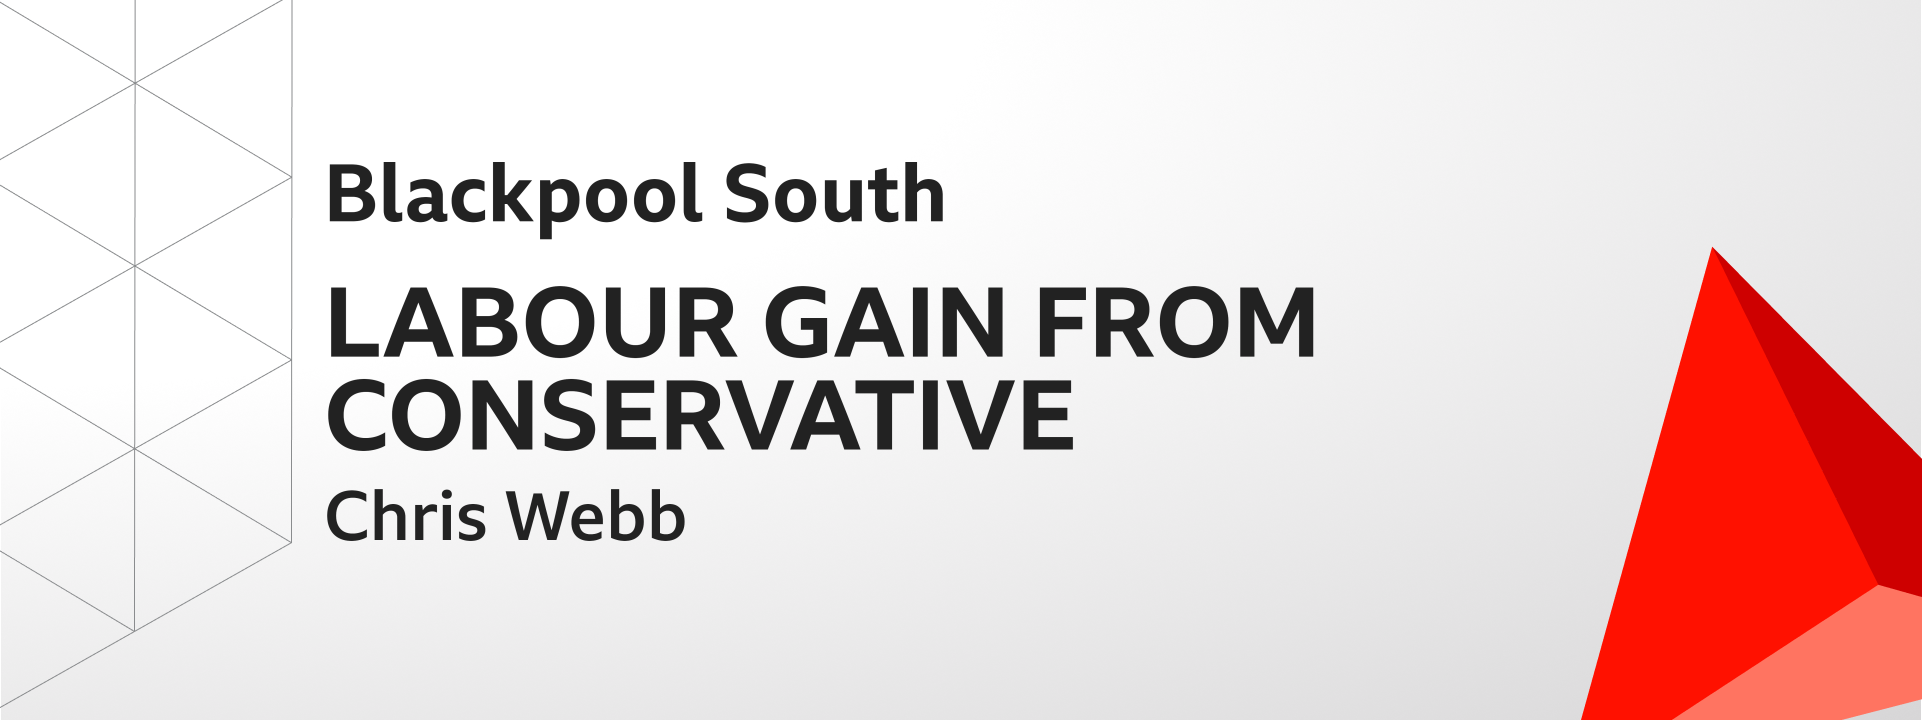 Graphic showing Labour gains Blackpool South from the Conservatives. The winning candidate was Chris Webb.